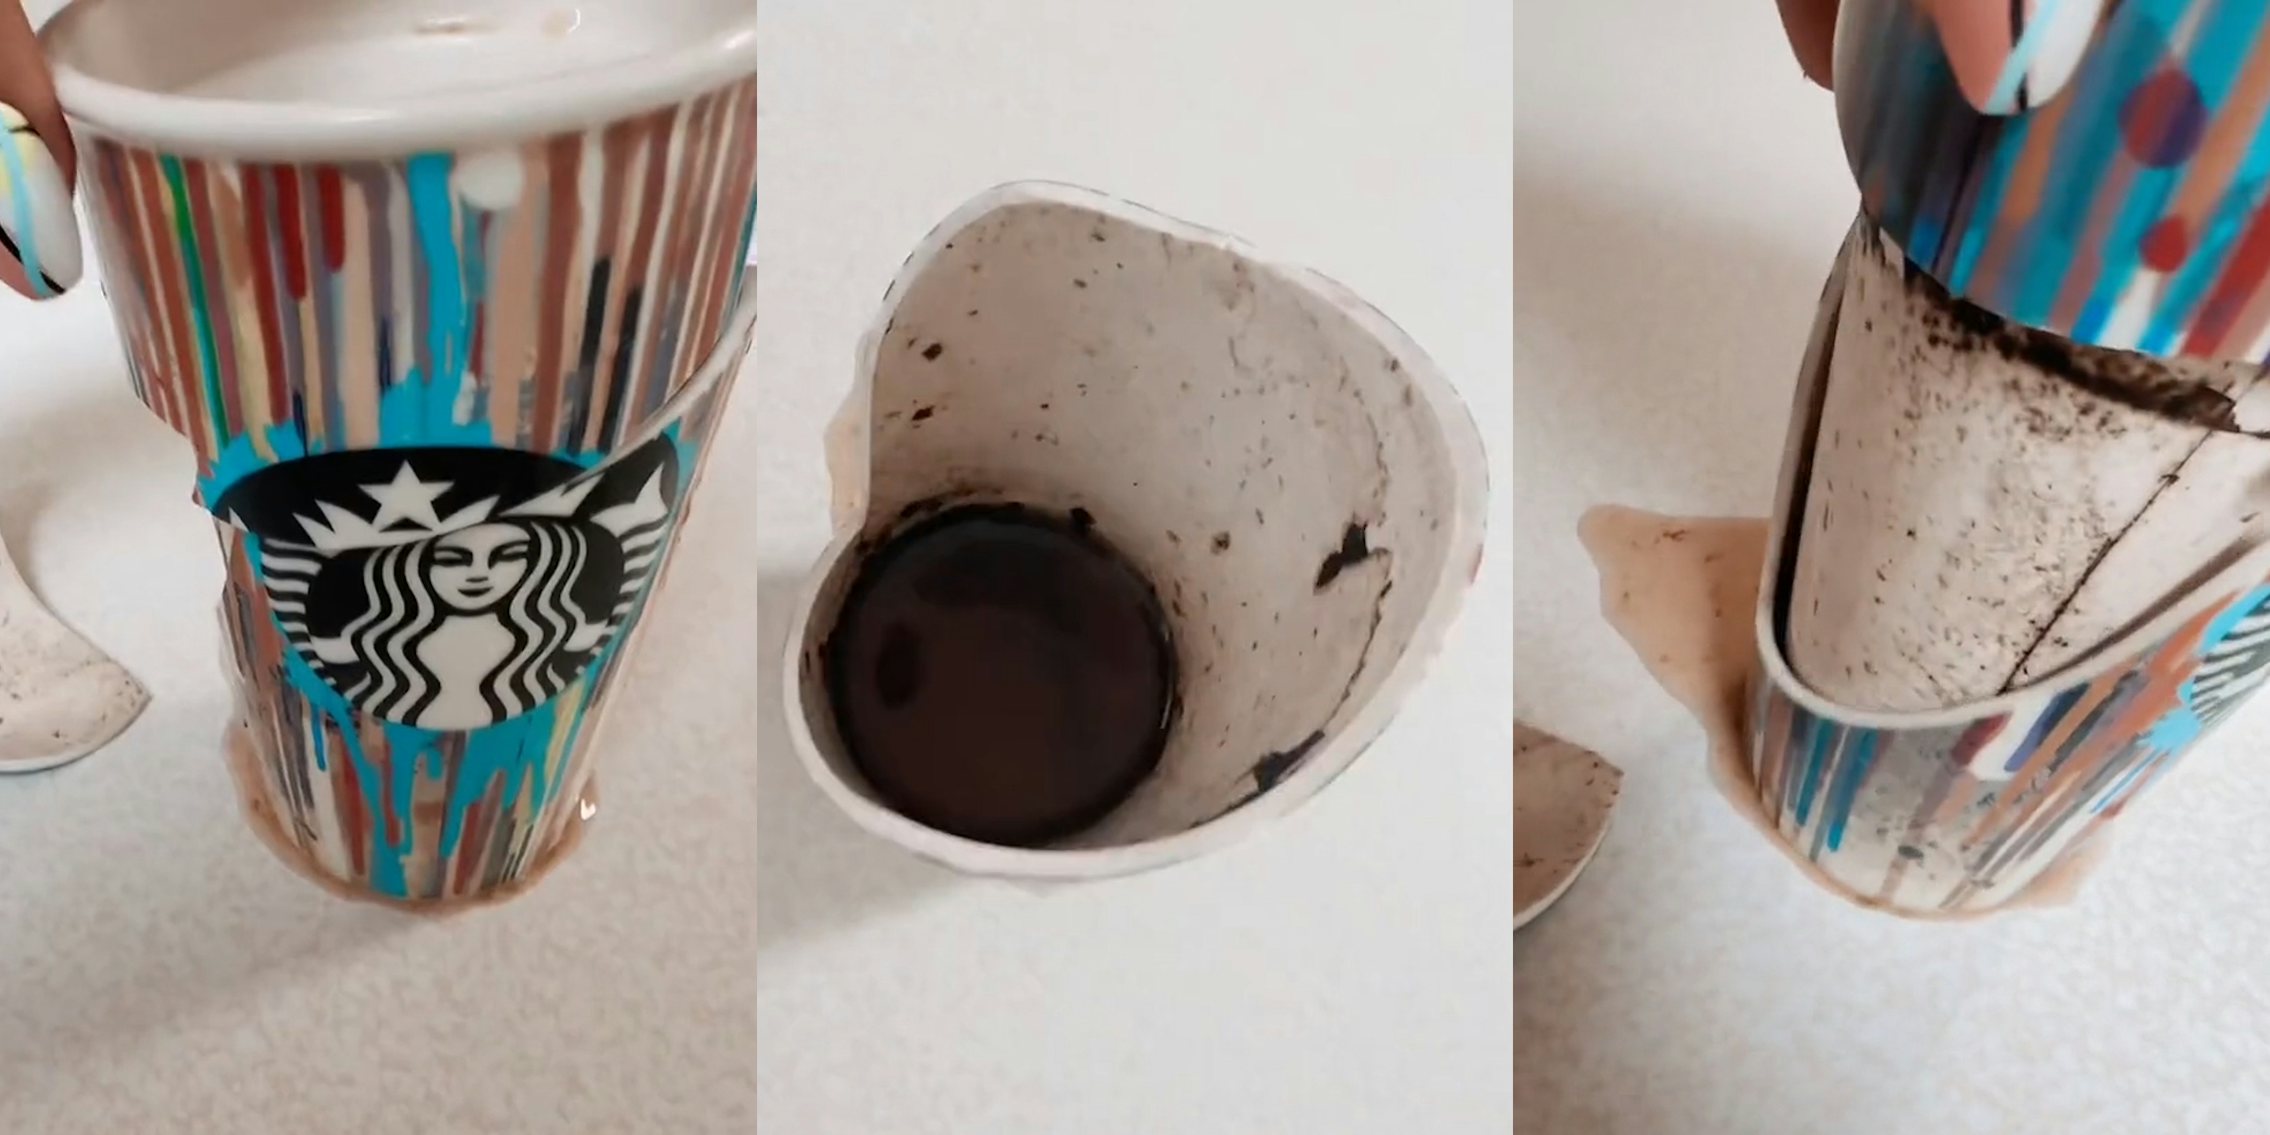 Your Travel Mugs Are Probably Full Of Mold - Ceramic Mug Mold Growth